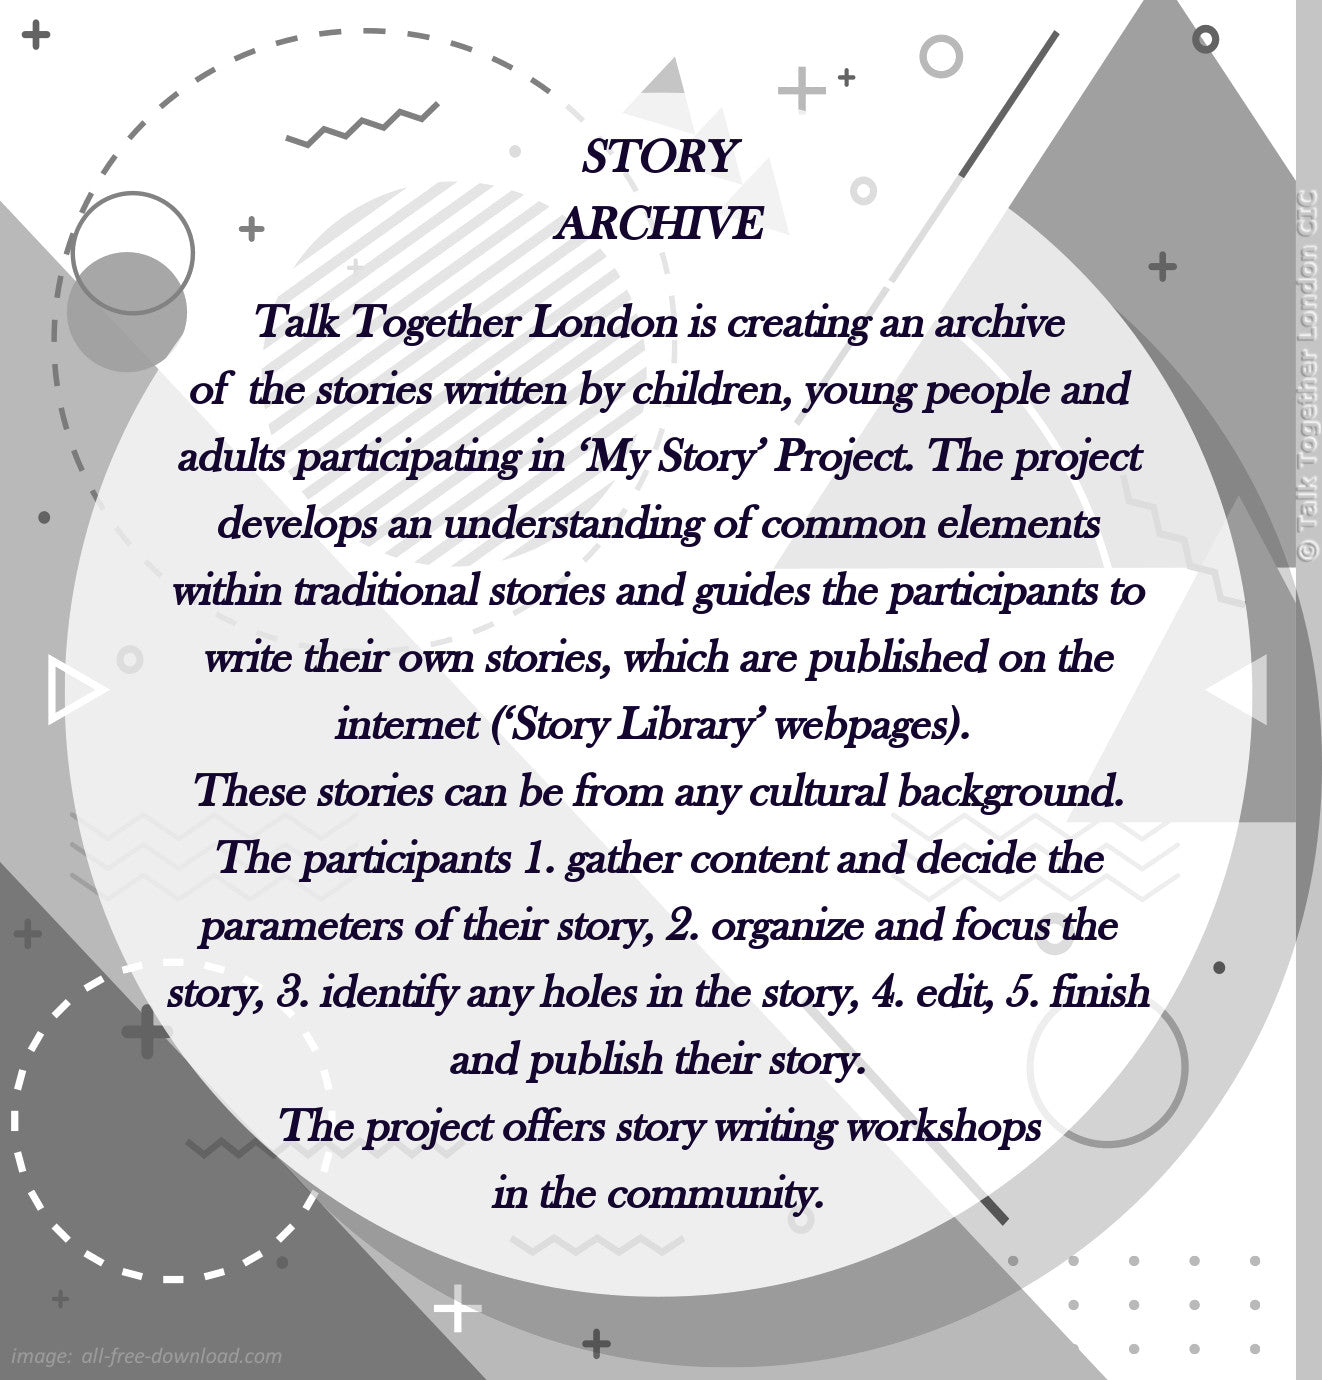 TTLCIC offers a free story archive.